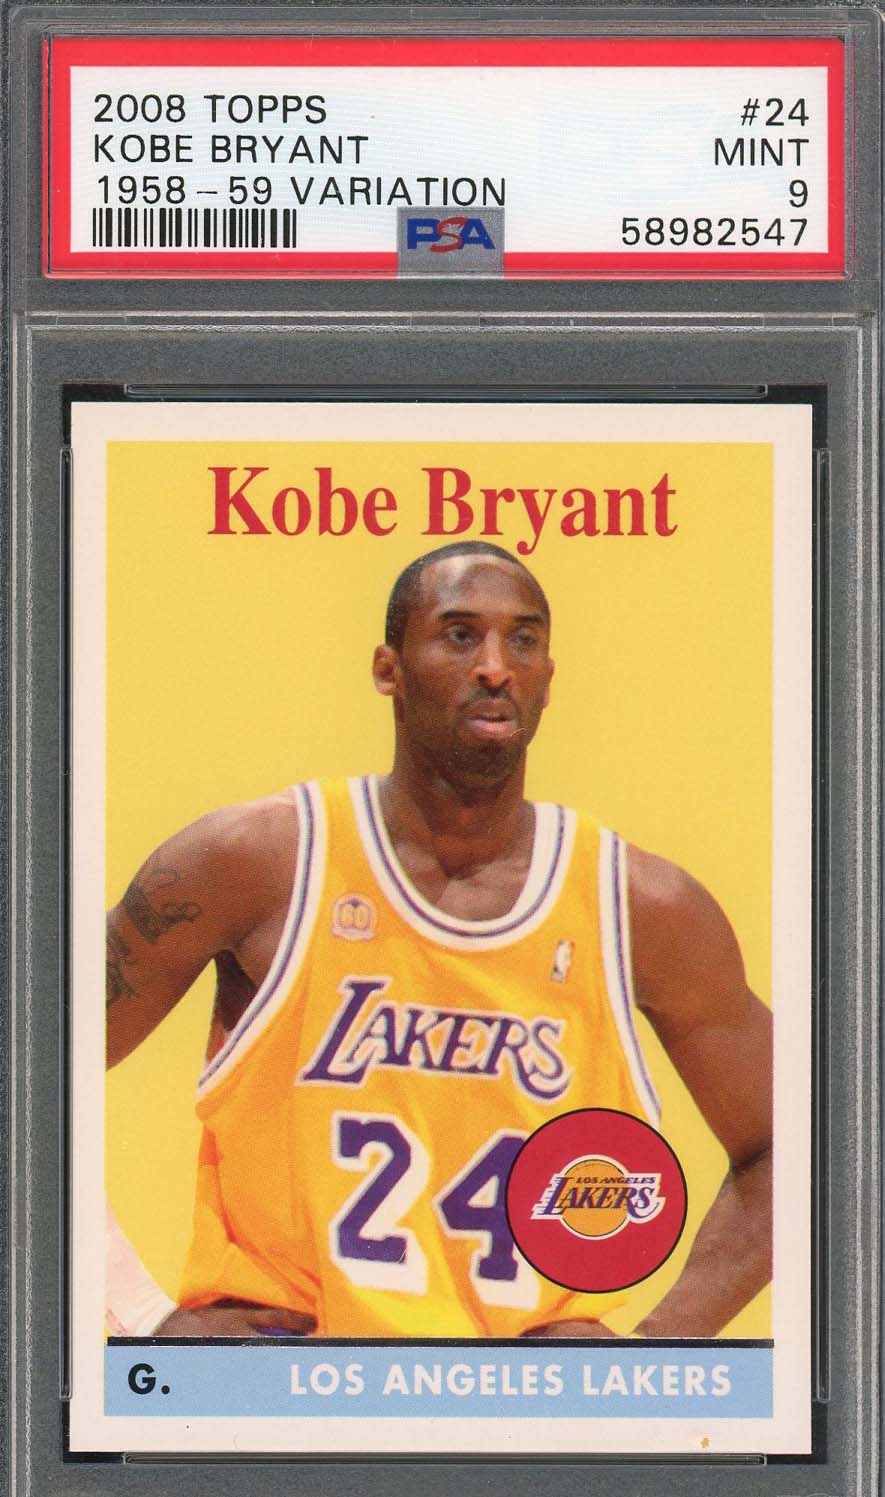 Kobe Bryant Framed #24 Jersey with Autographed Card